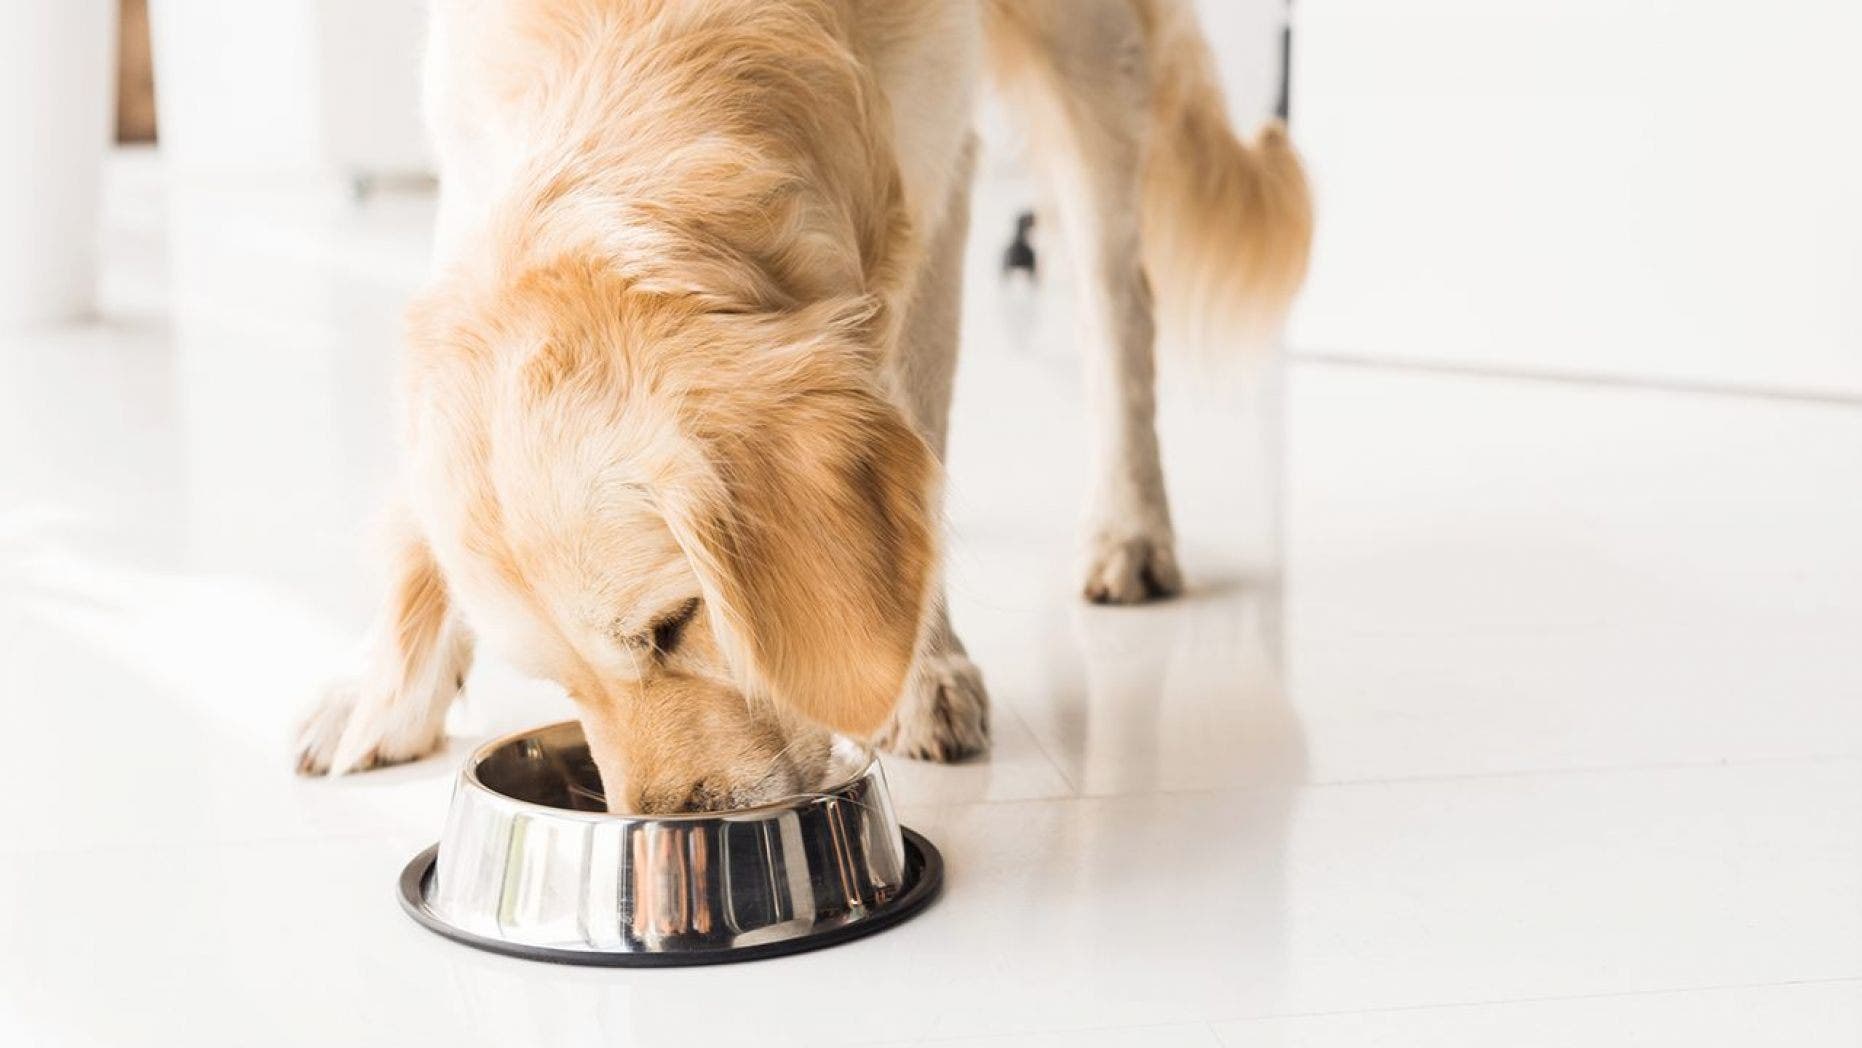 Hills Pet Nutrition expands dog food recall over toxic vitamin D levels 2